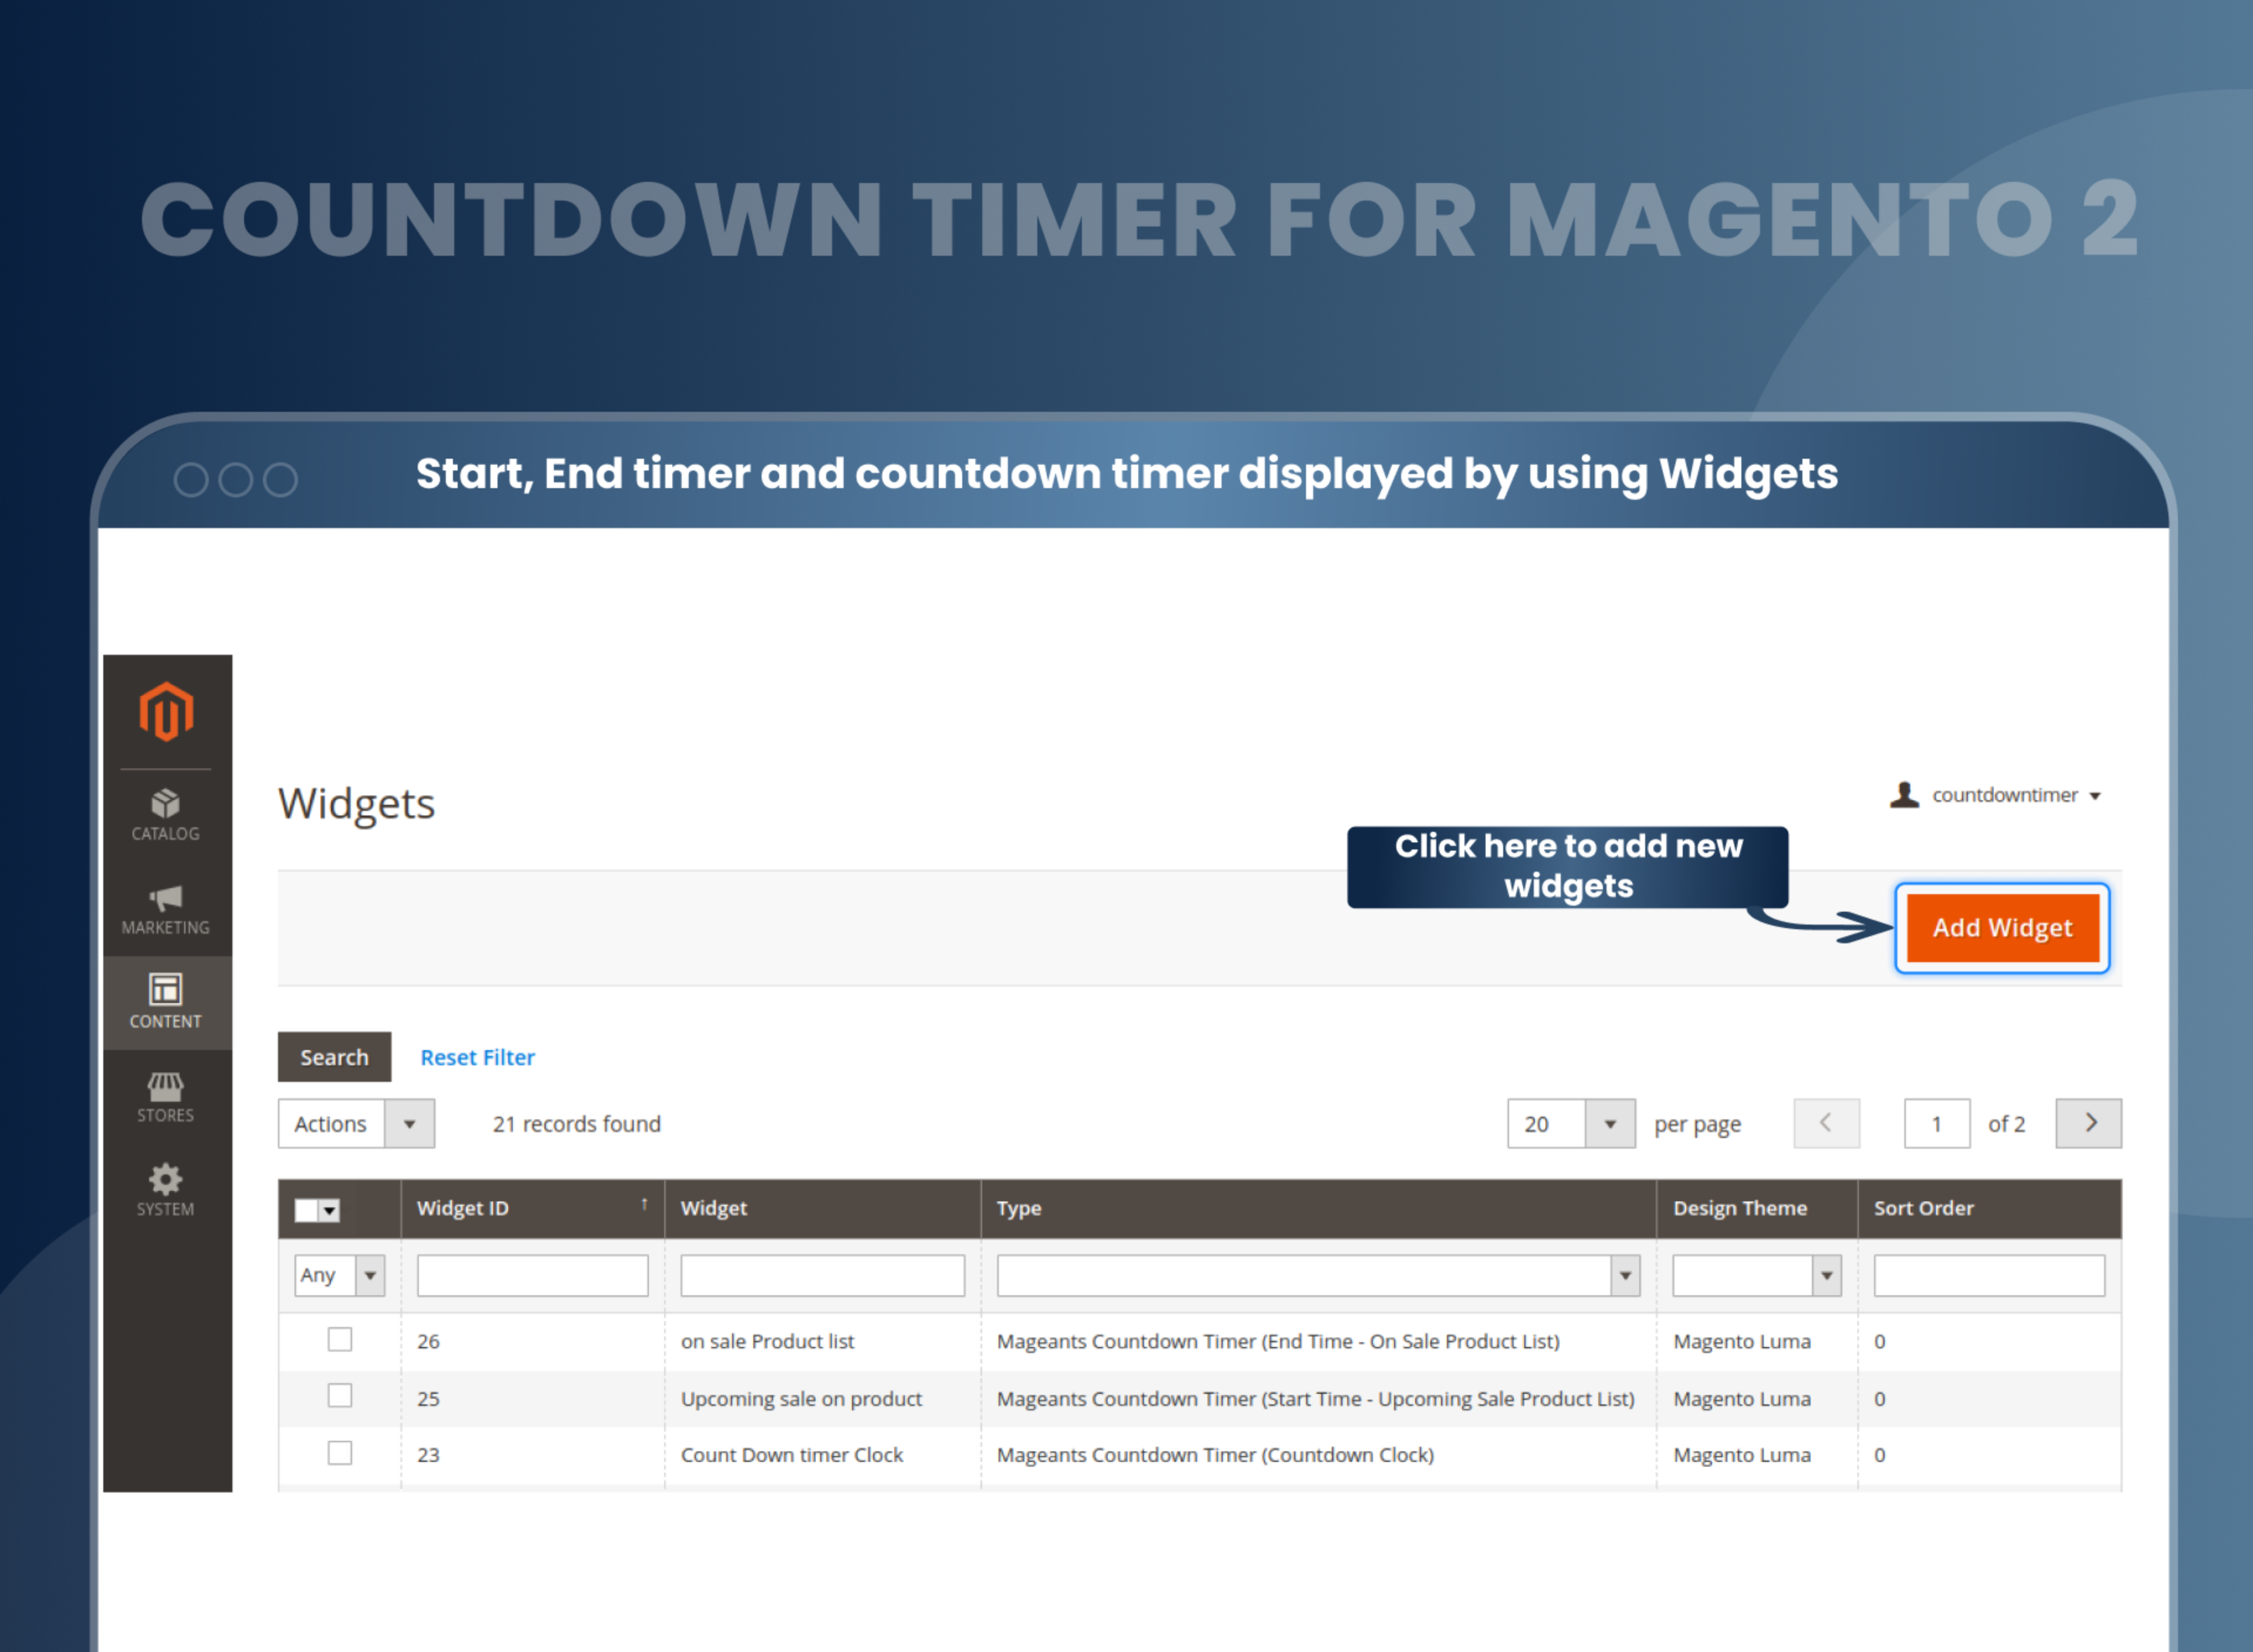 Start, End timer and countdown timer displayed by using Widgets